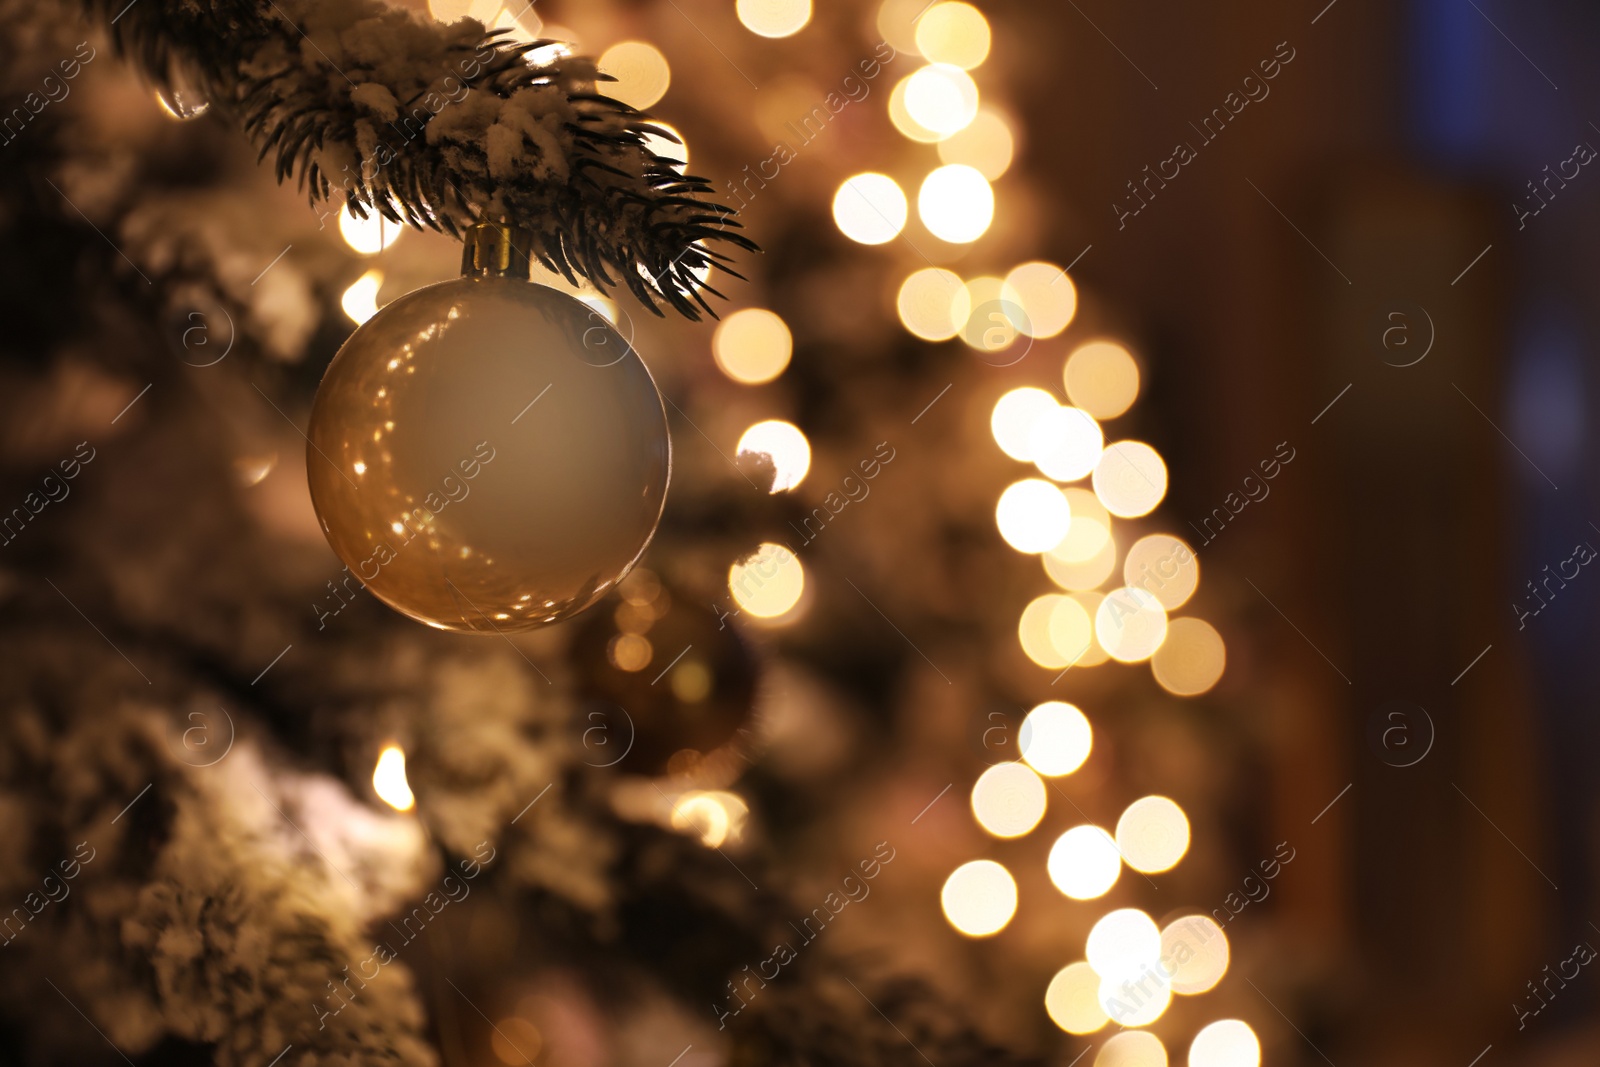 Photo of Closeup view of beautifully decorated Christmas tree indoors